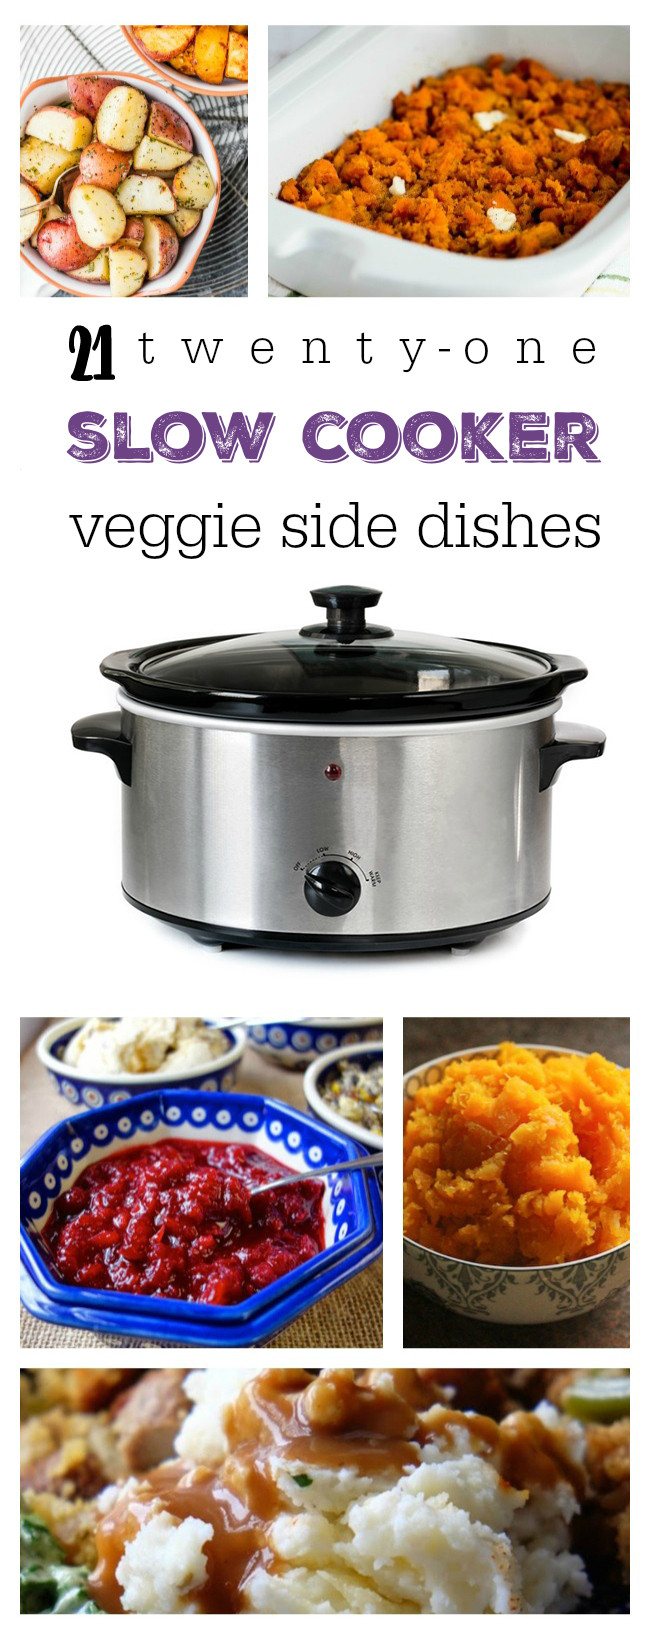 Slow Cooker Main Dishes
 21 Slow Cooker Ve able Side Dishes